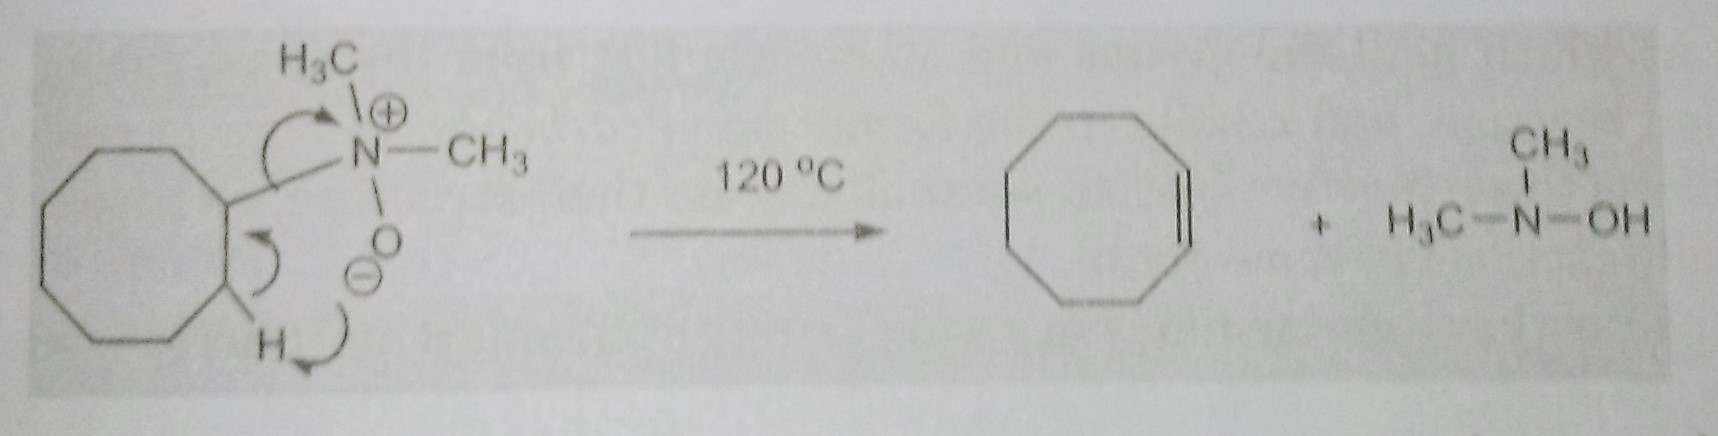 pyrolysis of amine oxide